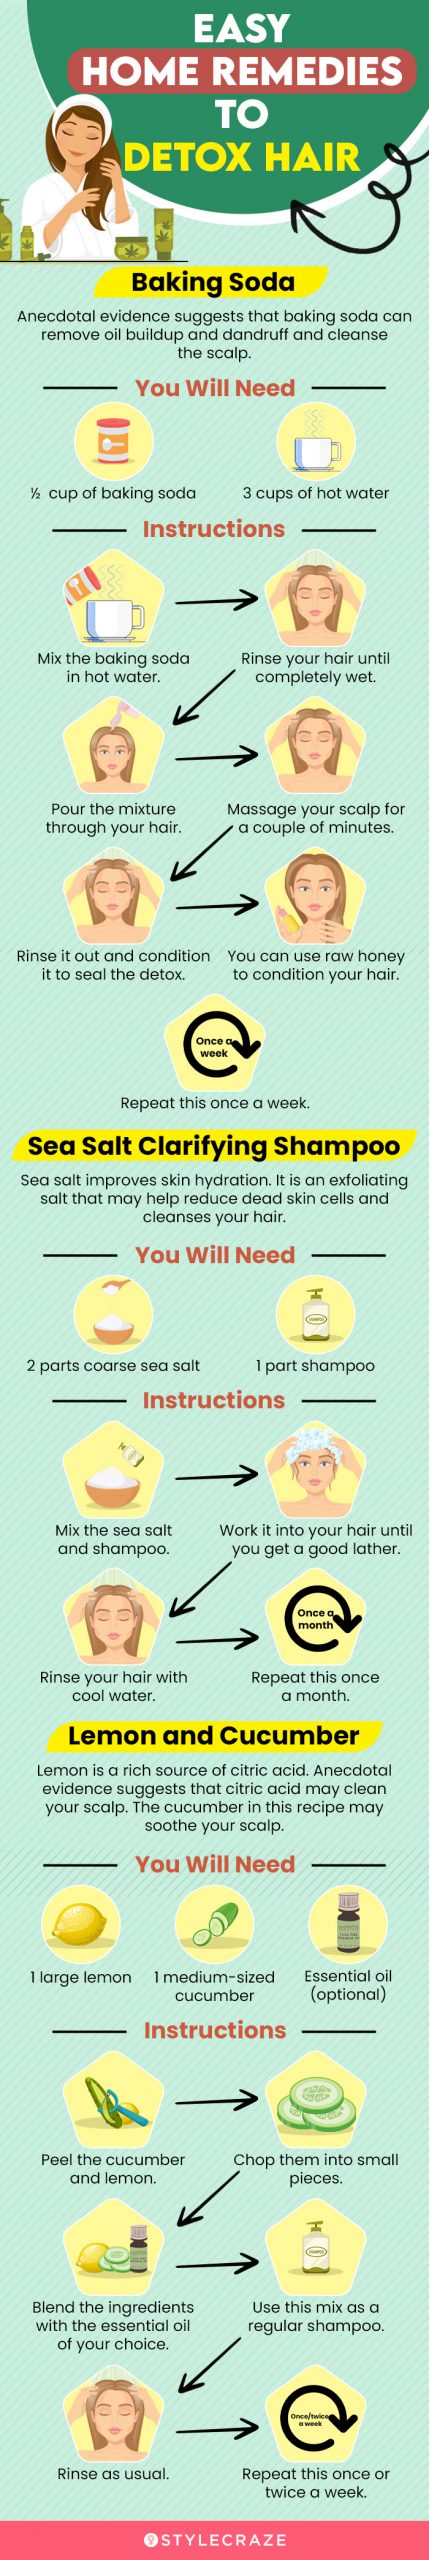 easy home remedies to detox hair [infographic]